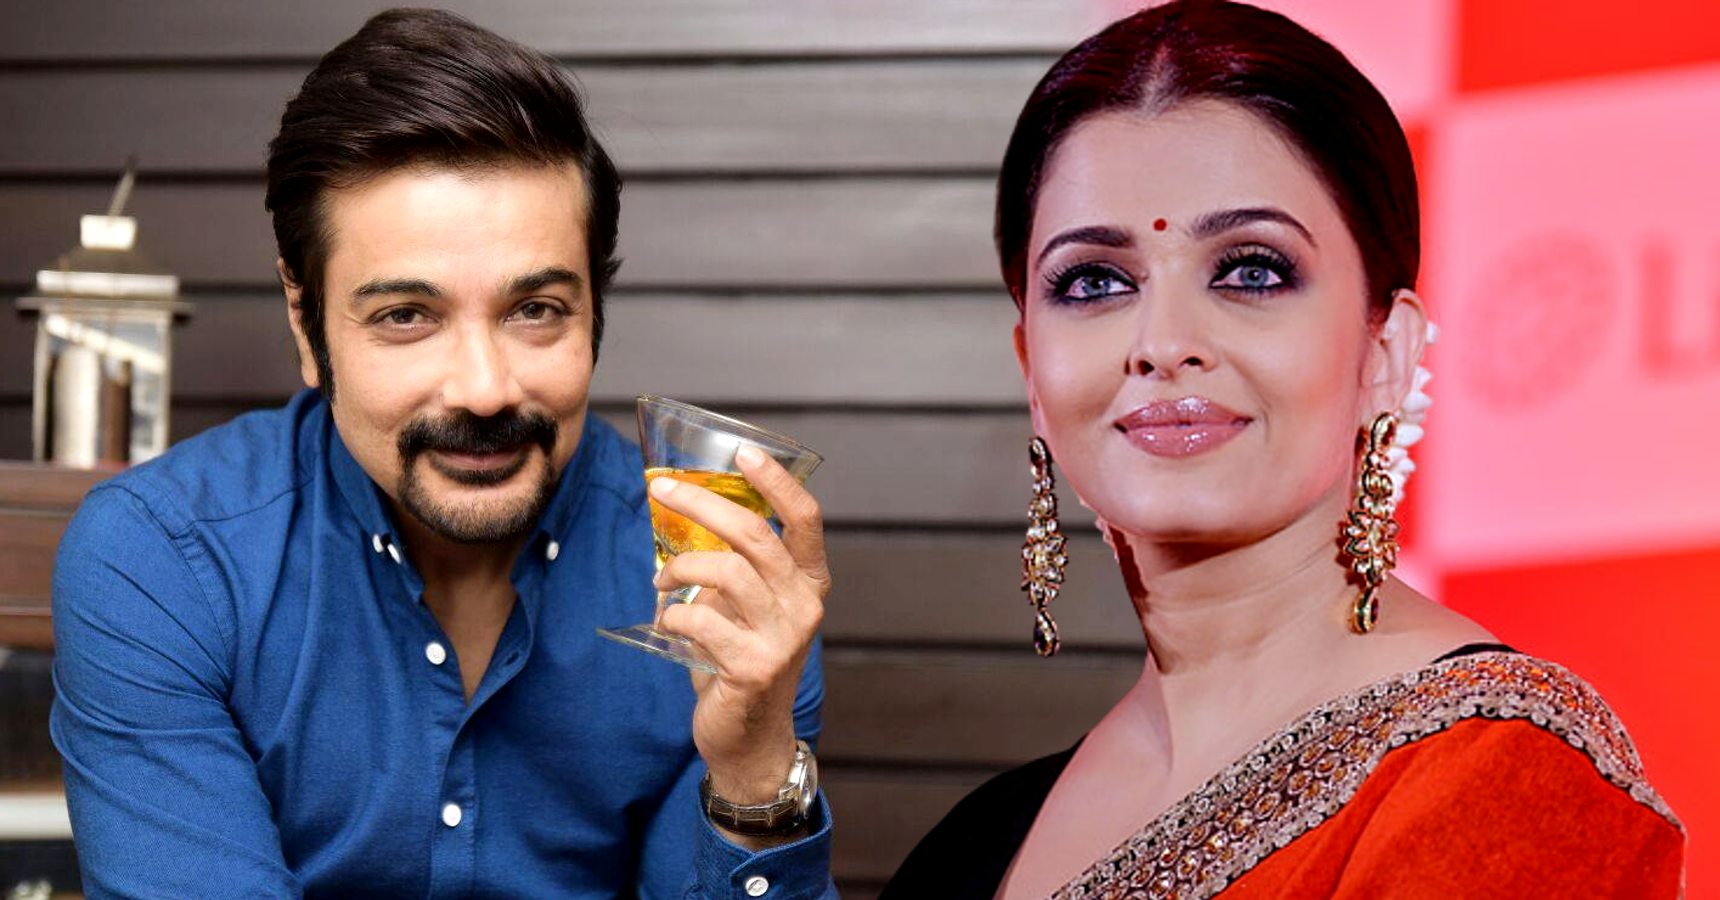 Prosenjit Chatterjee Rumoured to be Coming in South Industry with Aishwarya Rai